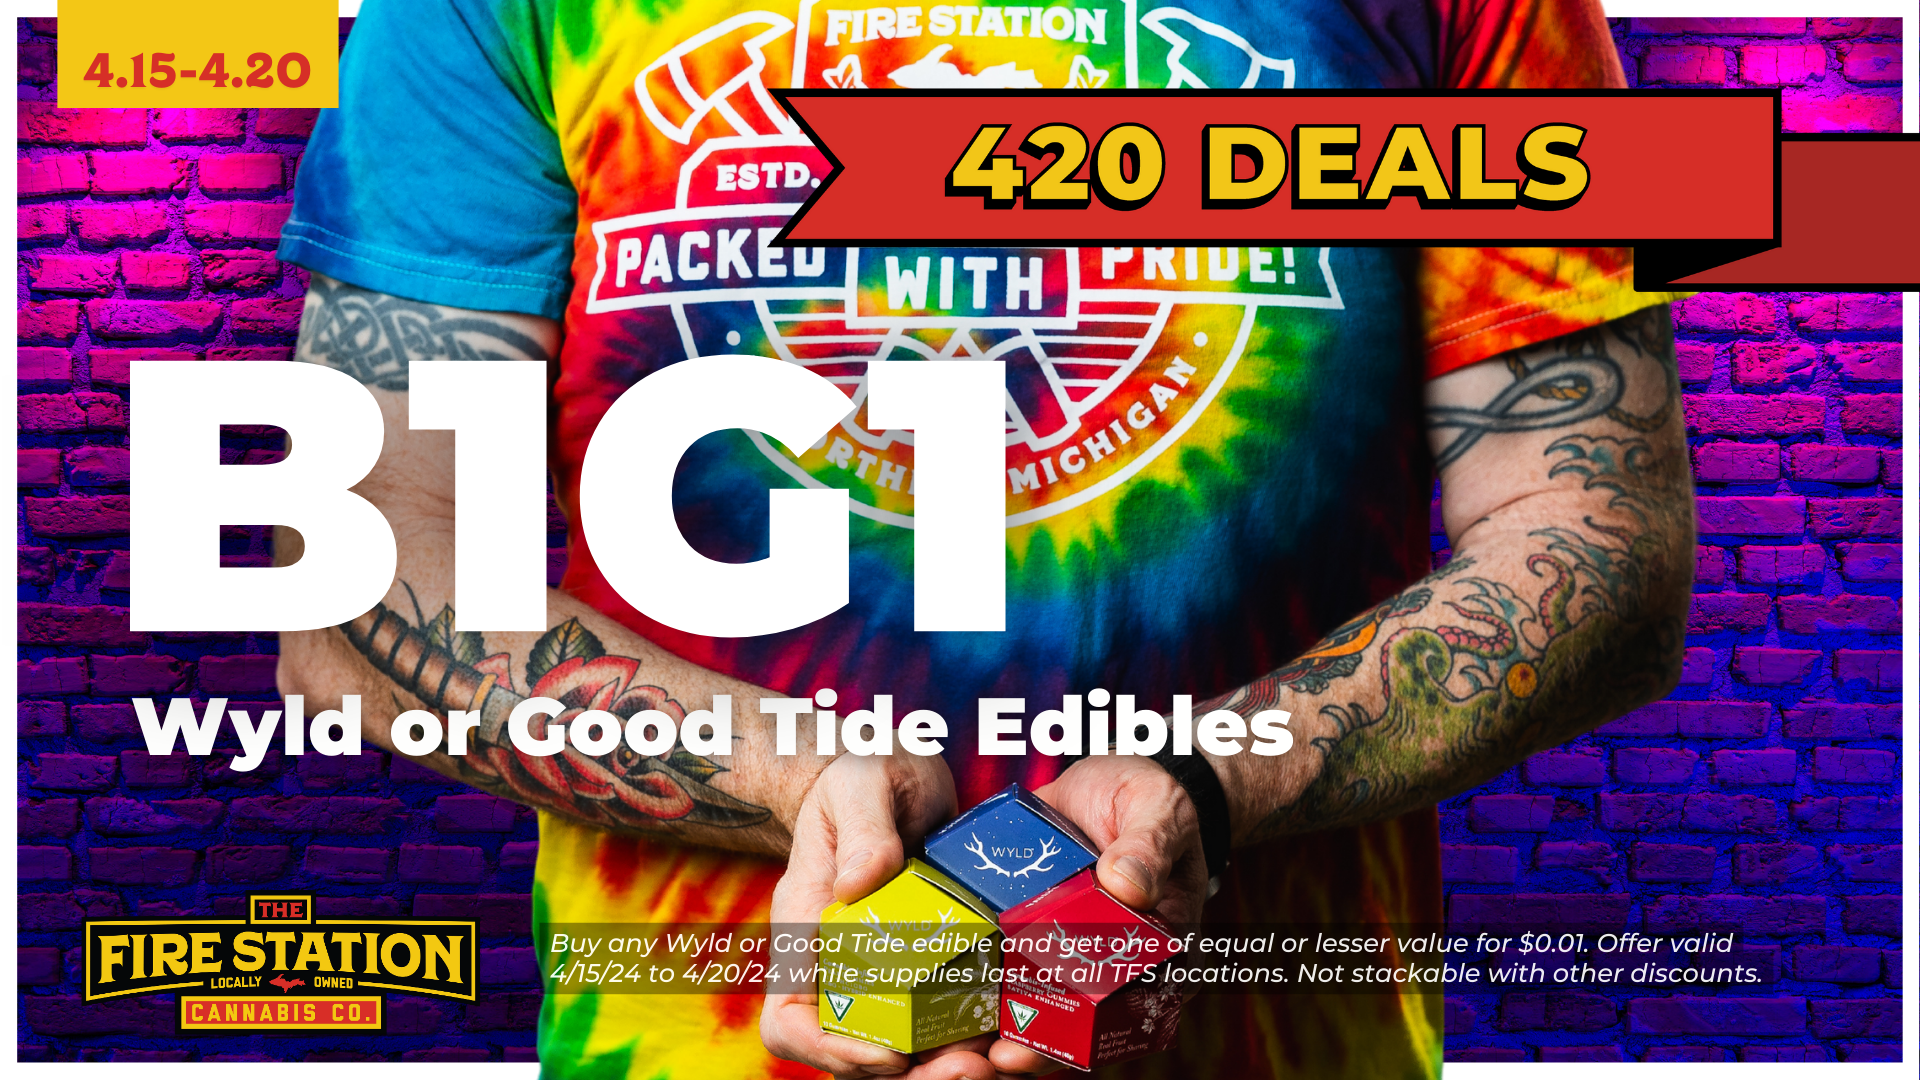 Buy any Wyld or Good Tide edible and get one of equal or lesser value for $0.01. Offer valid 4/15/24 to 4/20/24 while supplies last at all TFS locations. Not stackable with other discounts.